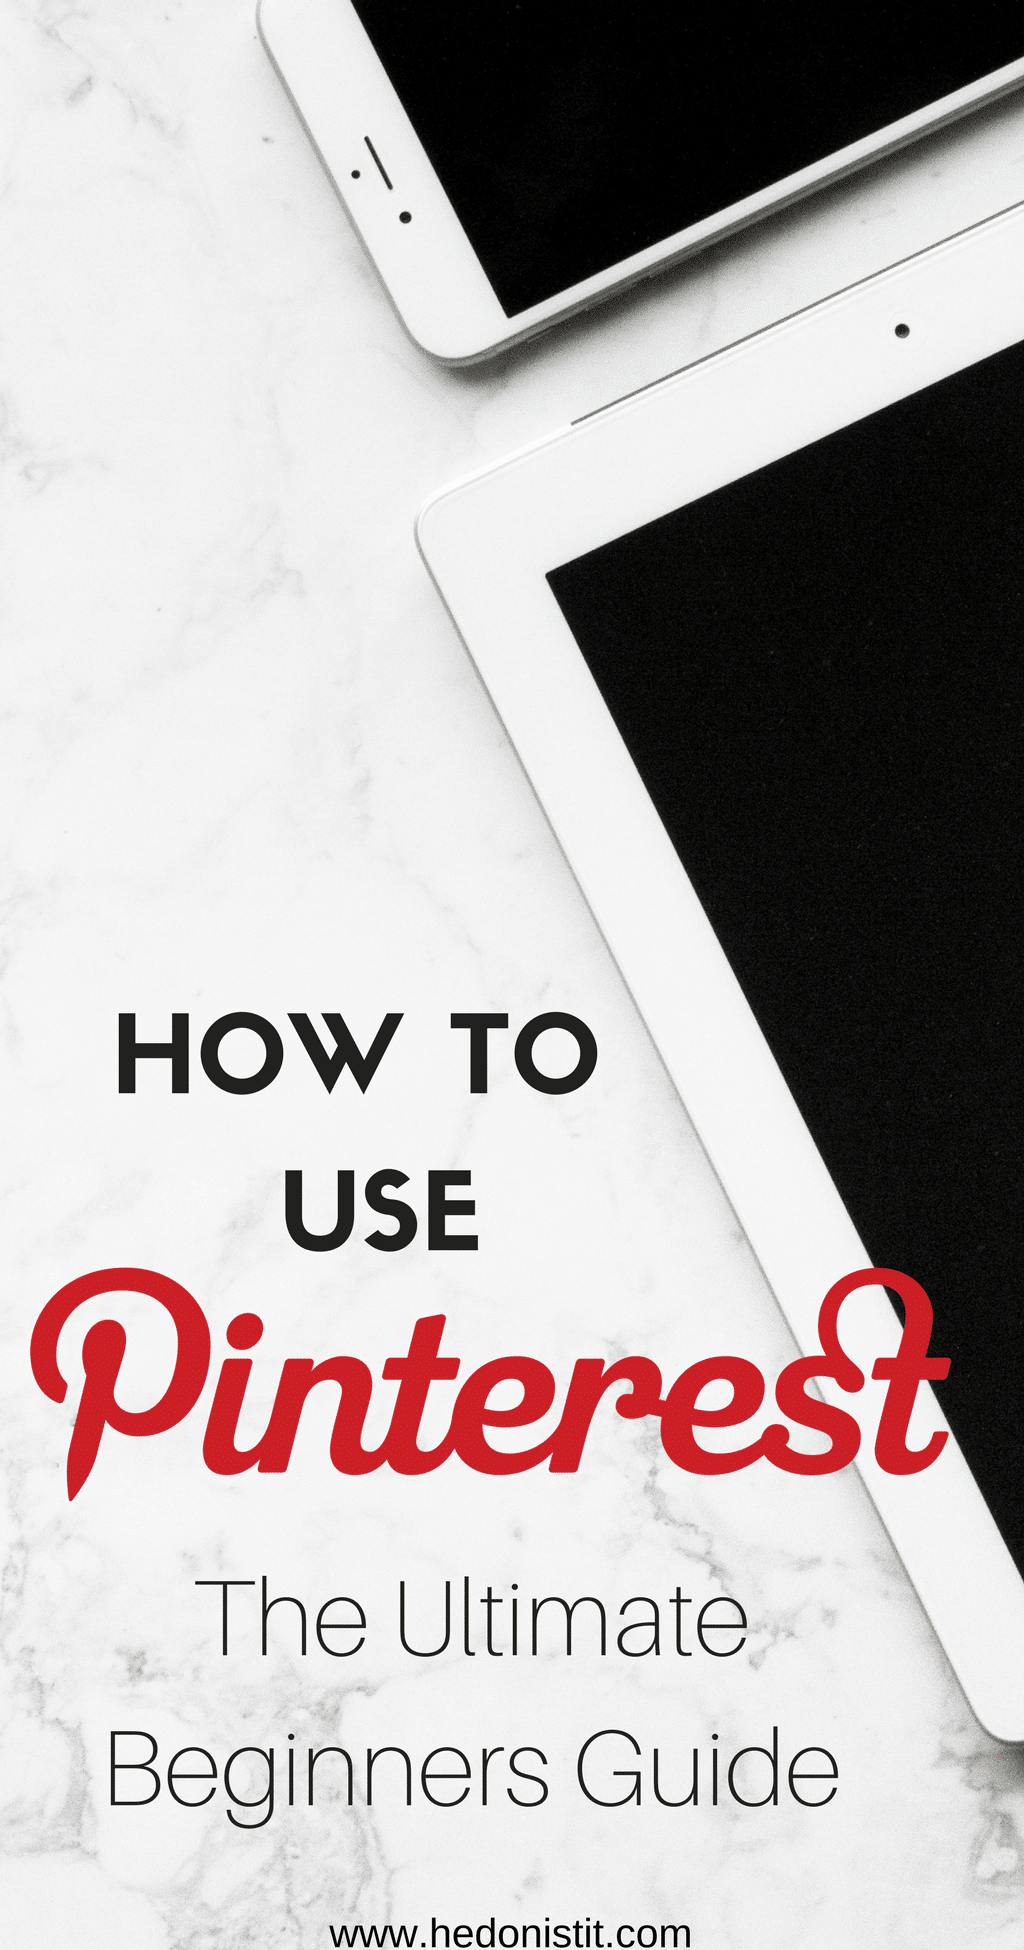 How to Use Pinterest for Beginners - All the terms you need to know in order to use this inspiration platform like a pro! Click through to read more @ hedonistit.com